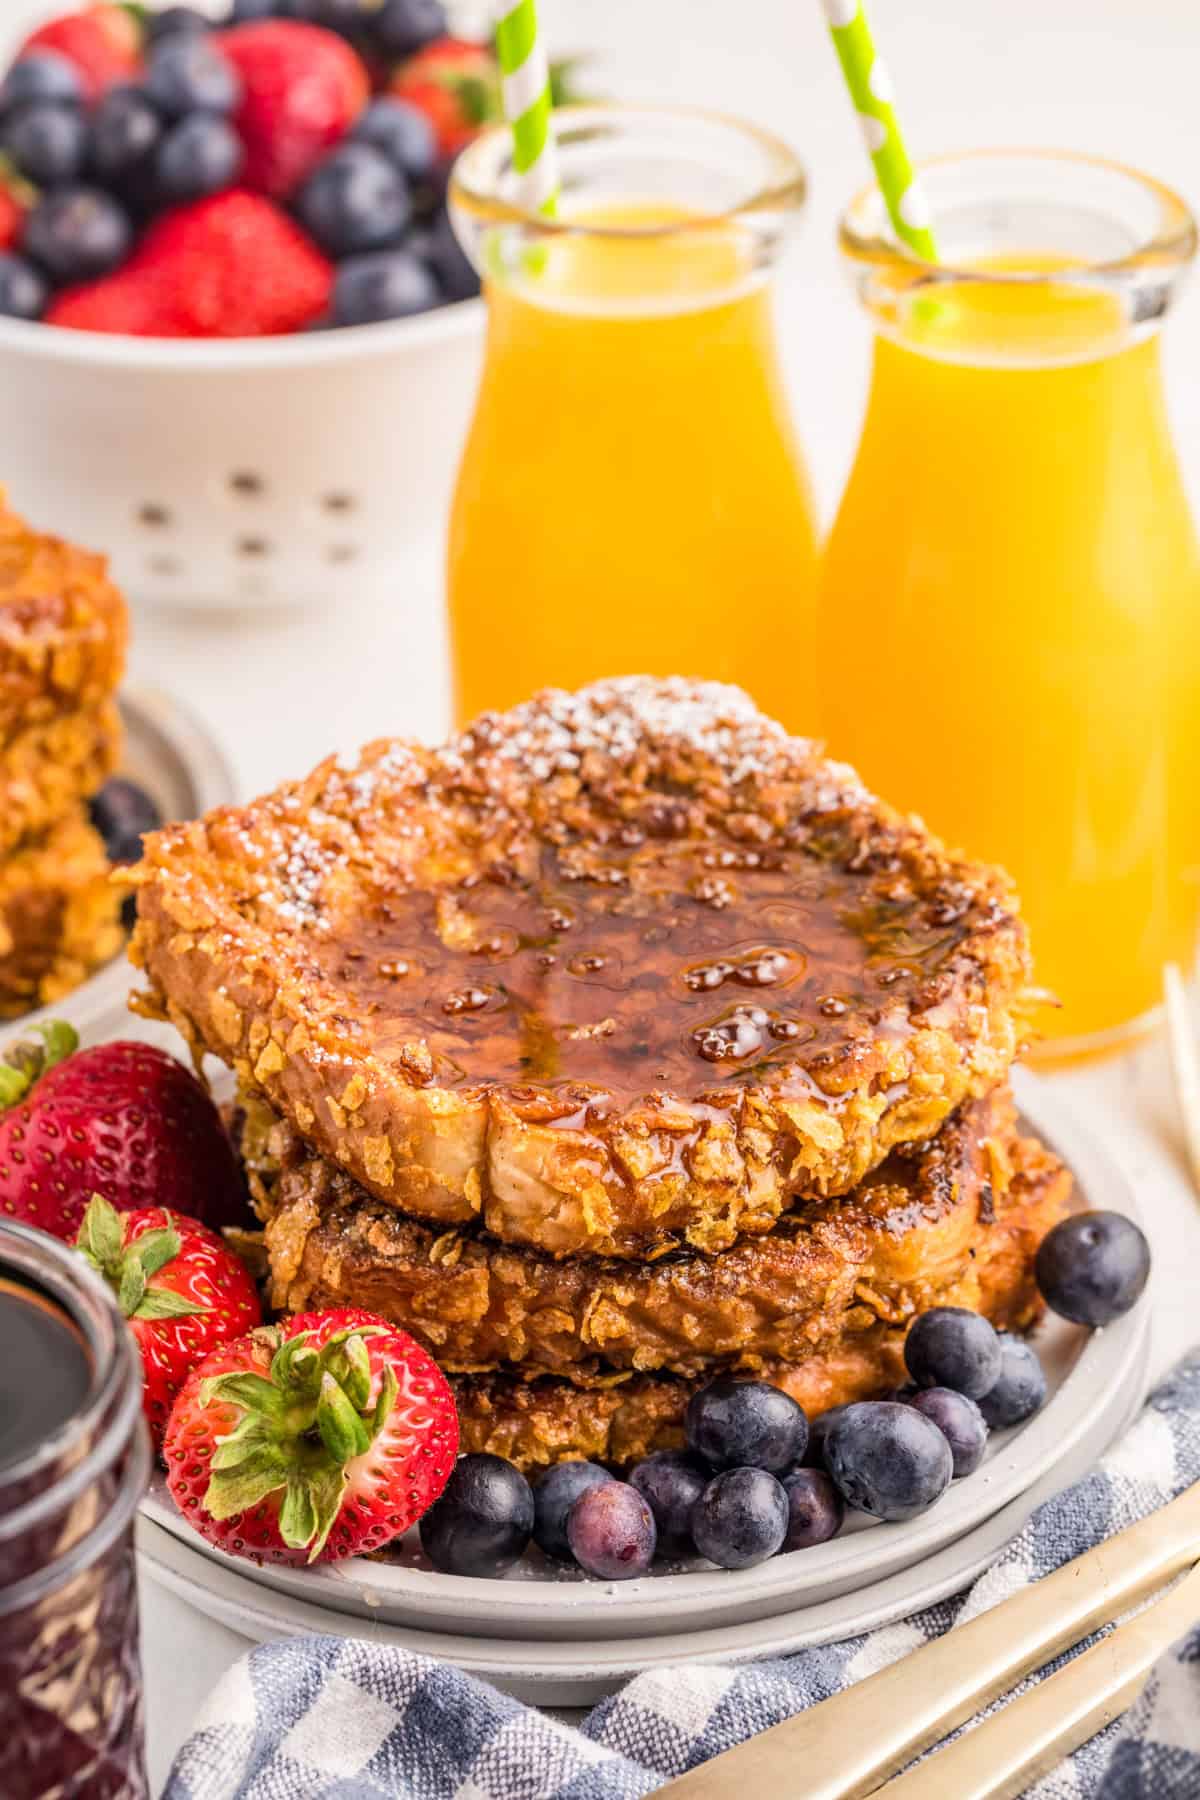 Crunchy French Toast stacked on white plate with fruit and orange juice in background.